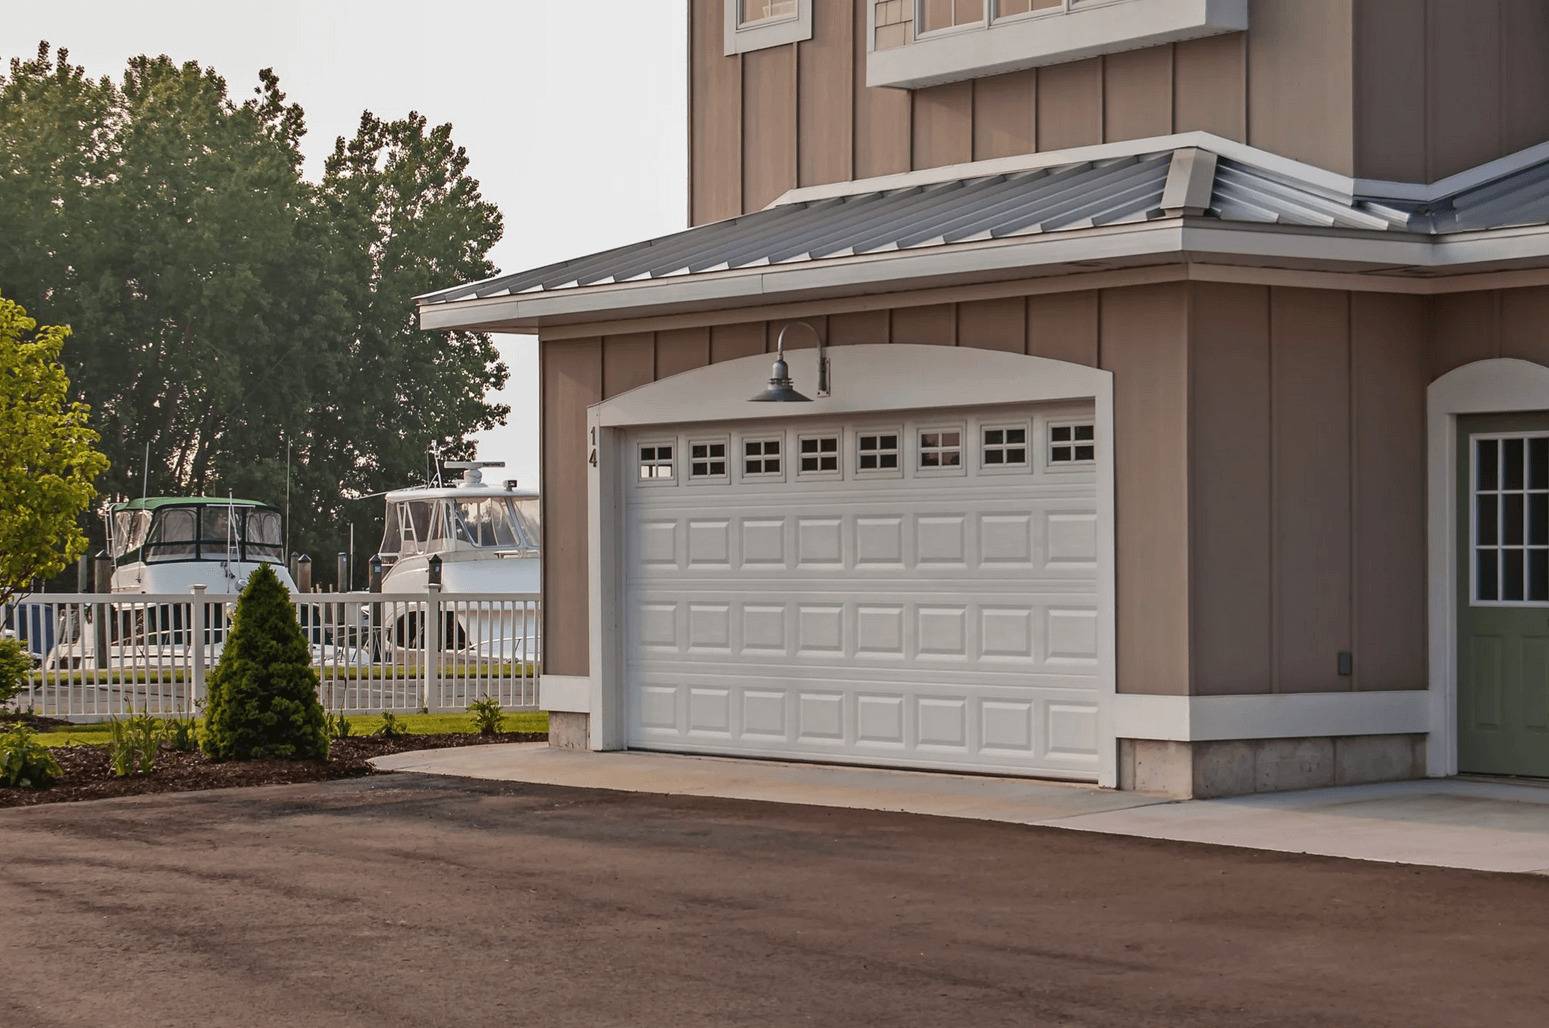 Add depth to your garage door with C.H.I.’s raised panel design, available in both short and long panel options.